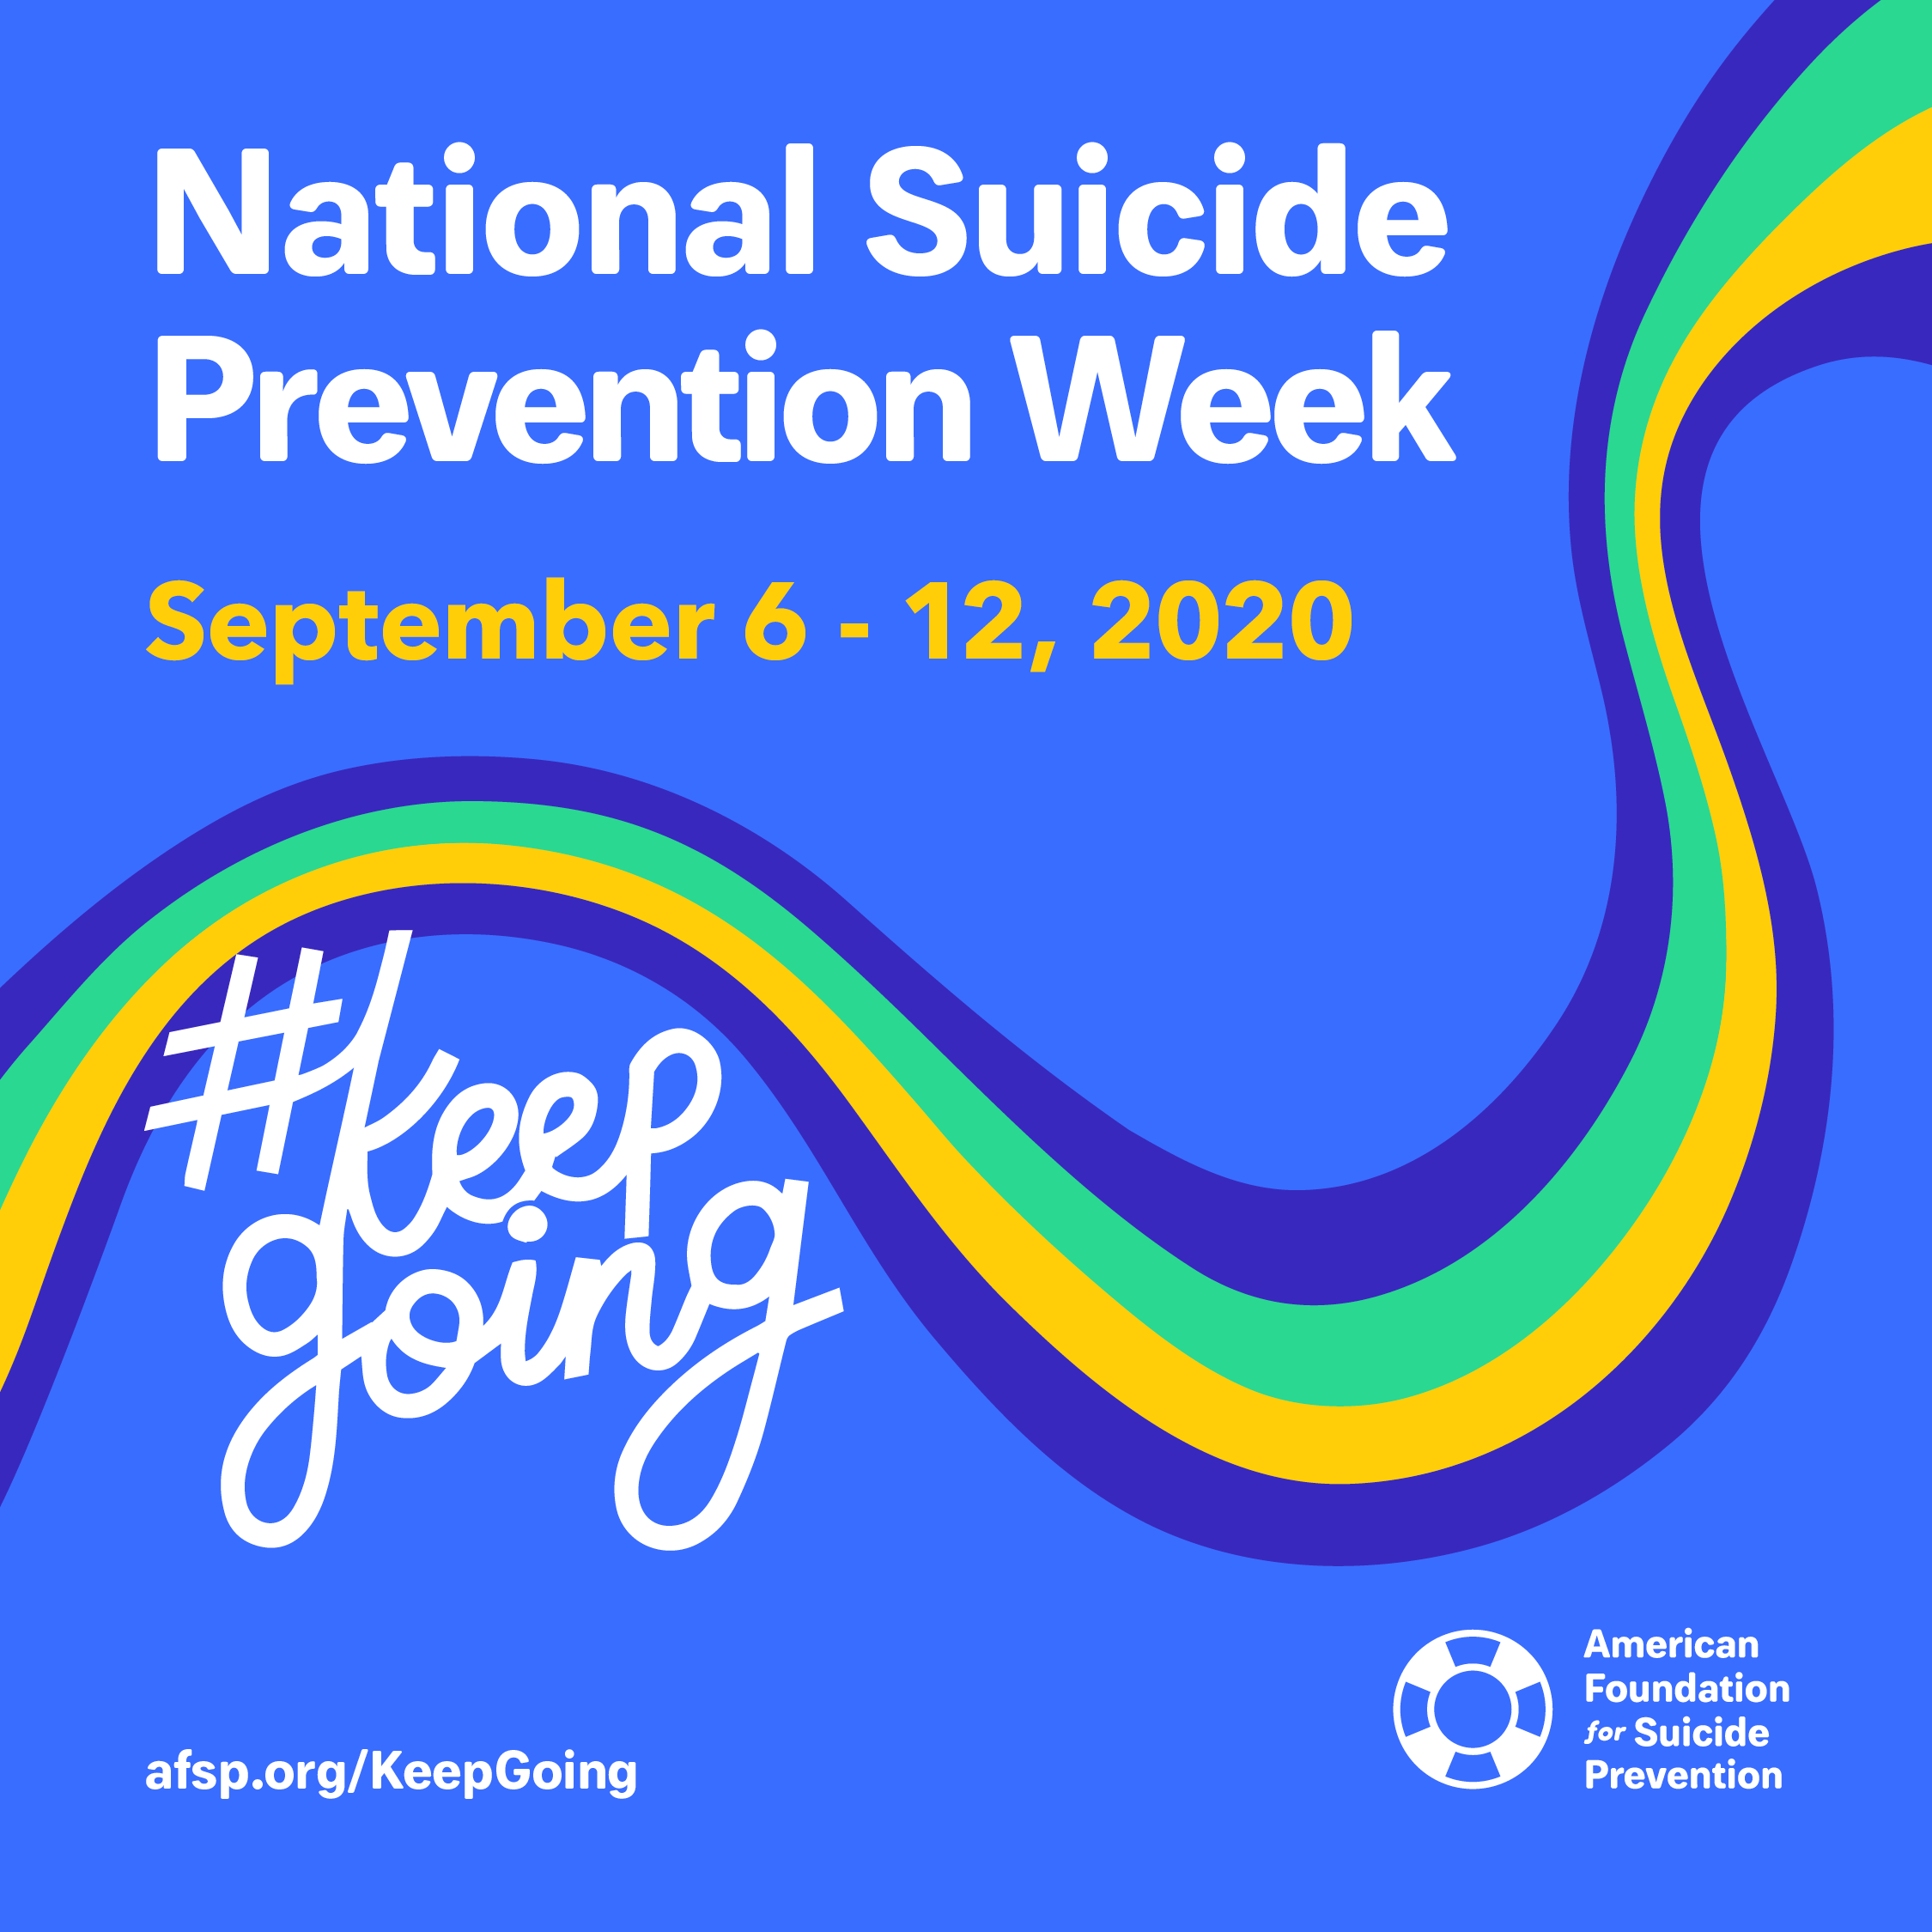 Photos that says, "National Suicide Prevention Week, September 6 - 12. #KeepGoing"